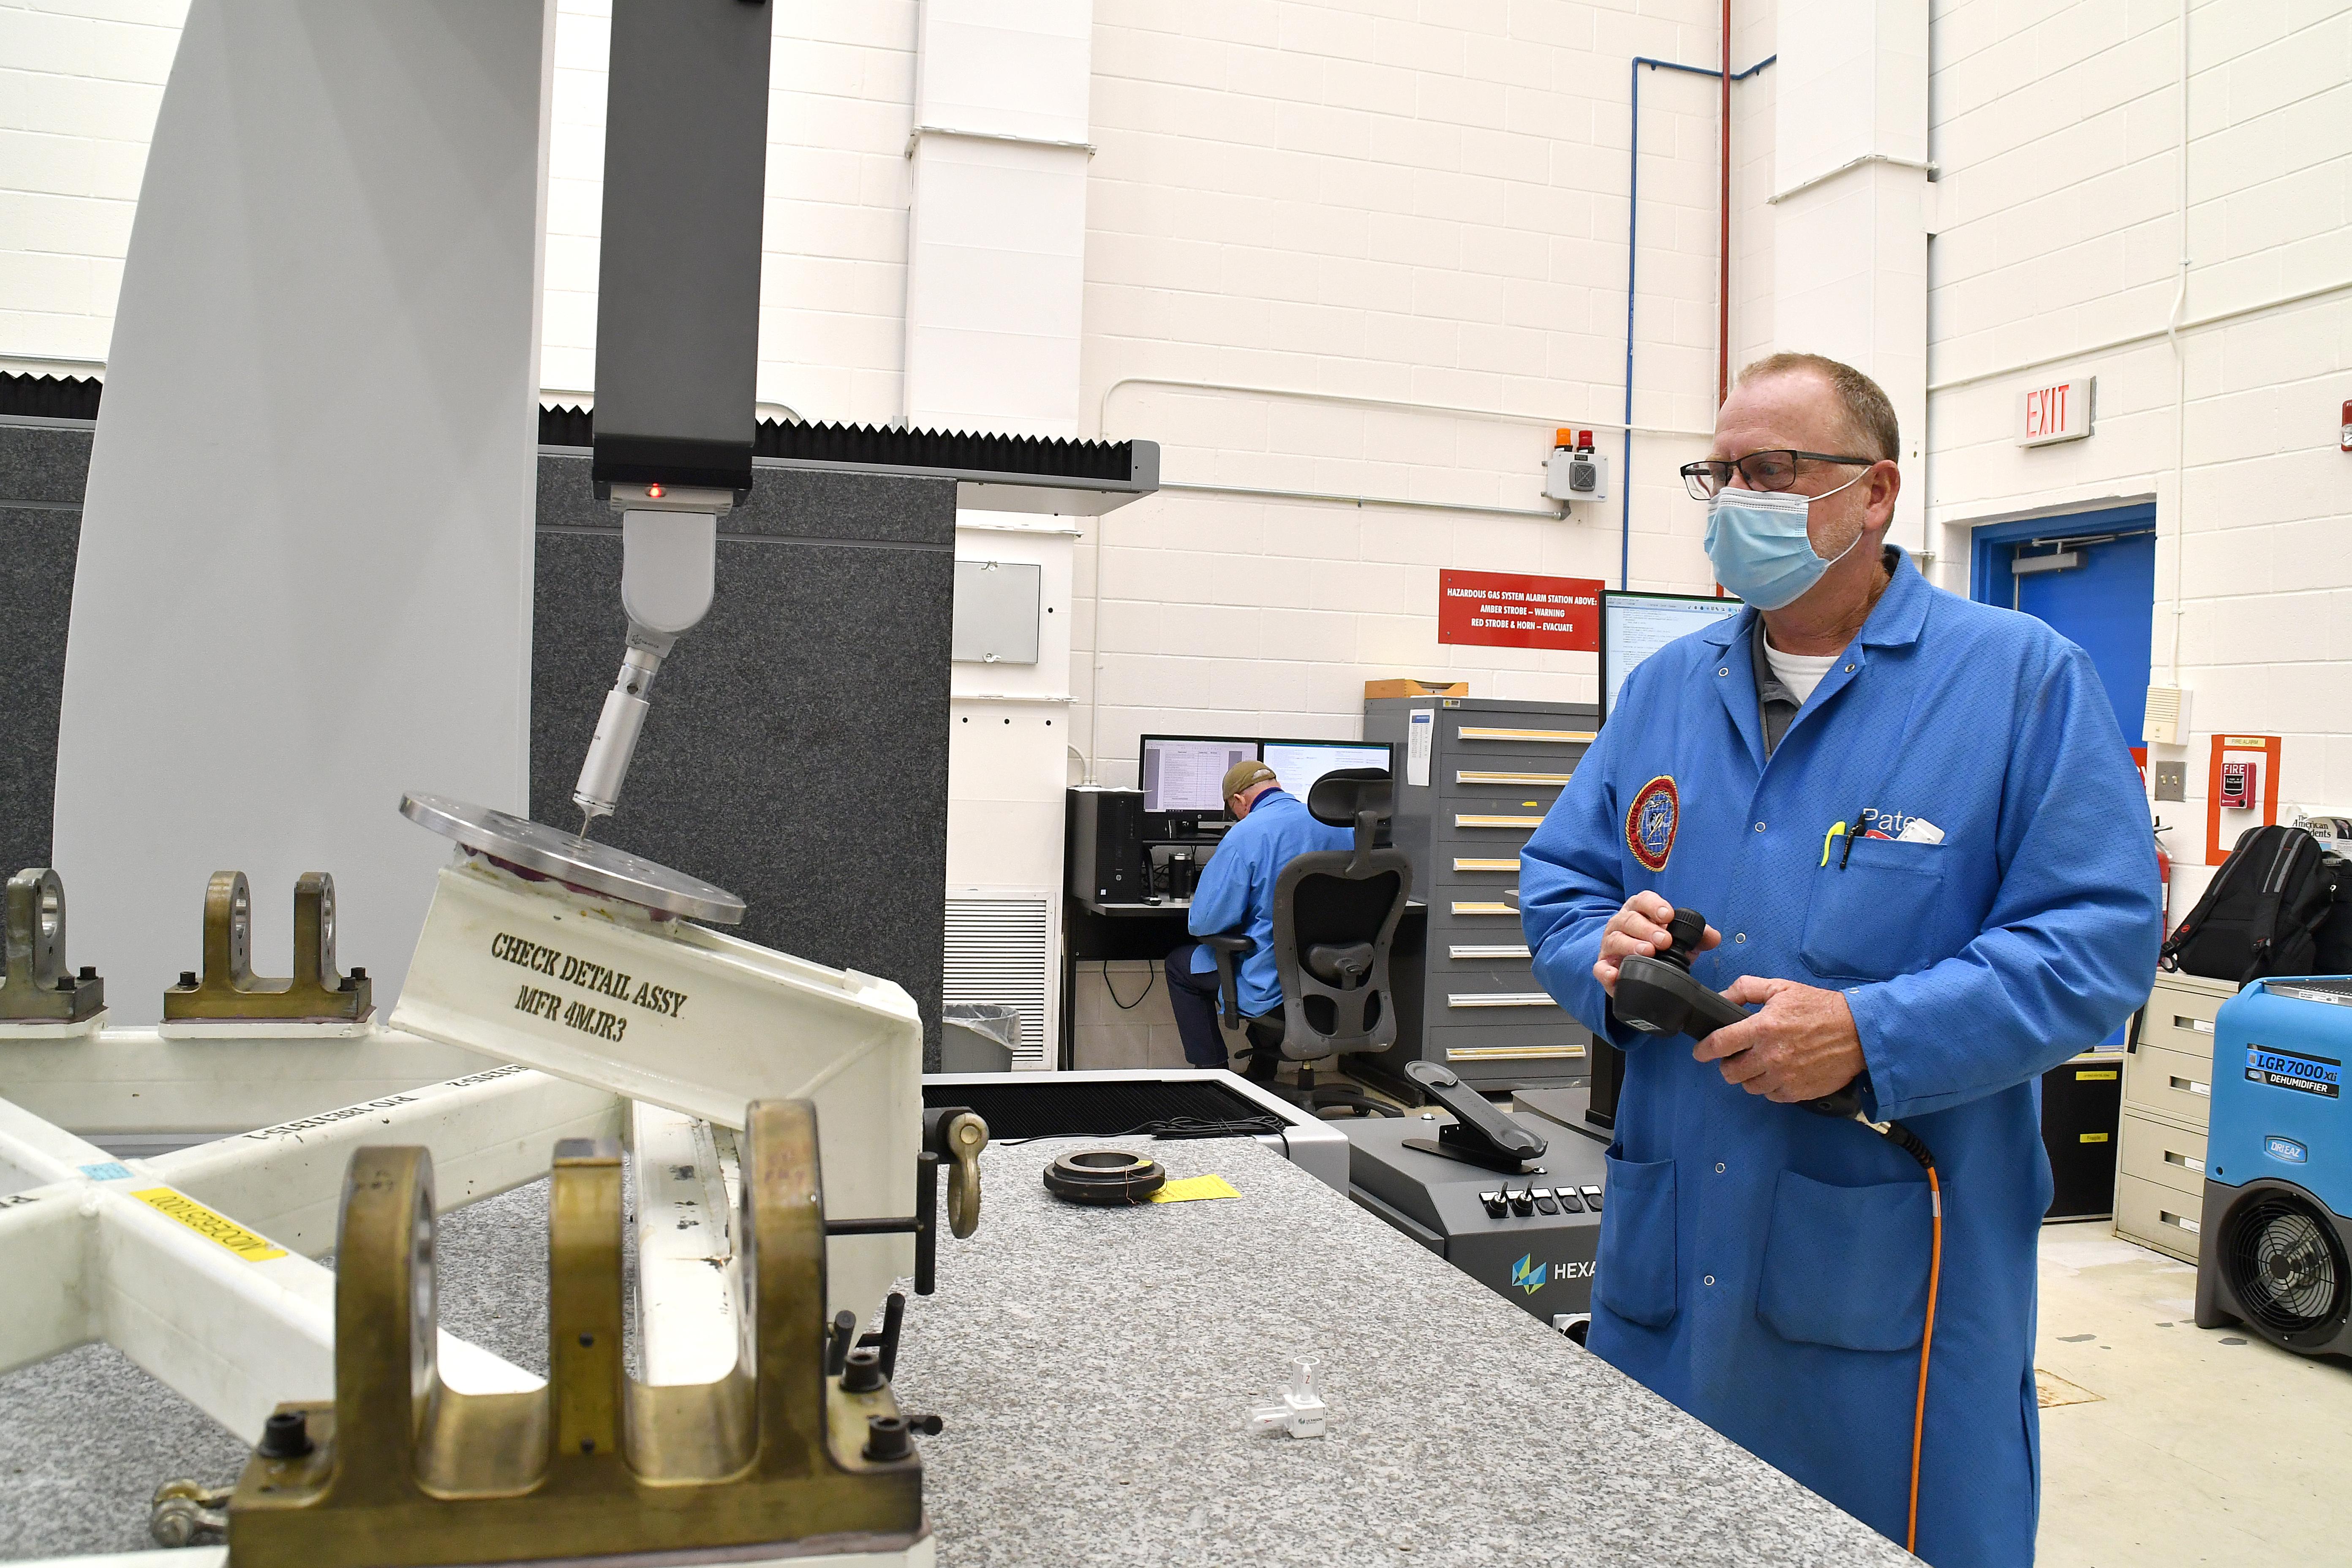 Ben Pate, operations manager at Fleet Readiness Center East’s (FRCE) Precision Measurement Center, operates a coordinate measuring machine (CMM). A CMM is a device that measures the geometry of physical objects by sensing points on the surface of the object with a probe. 